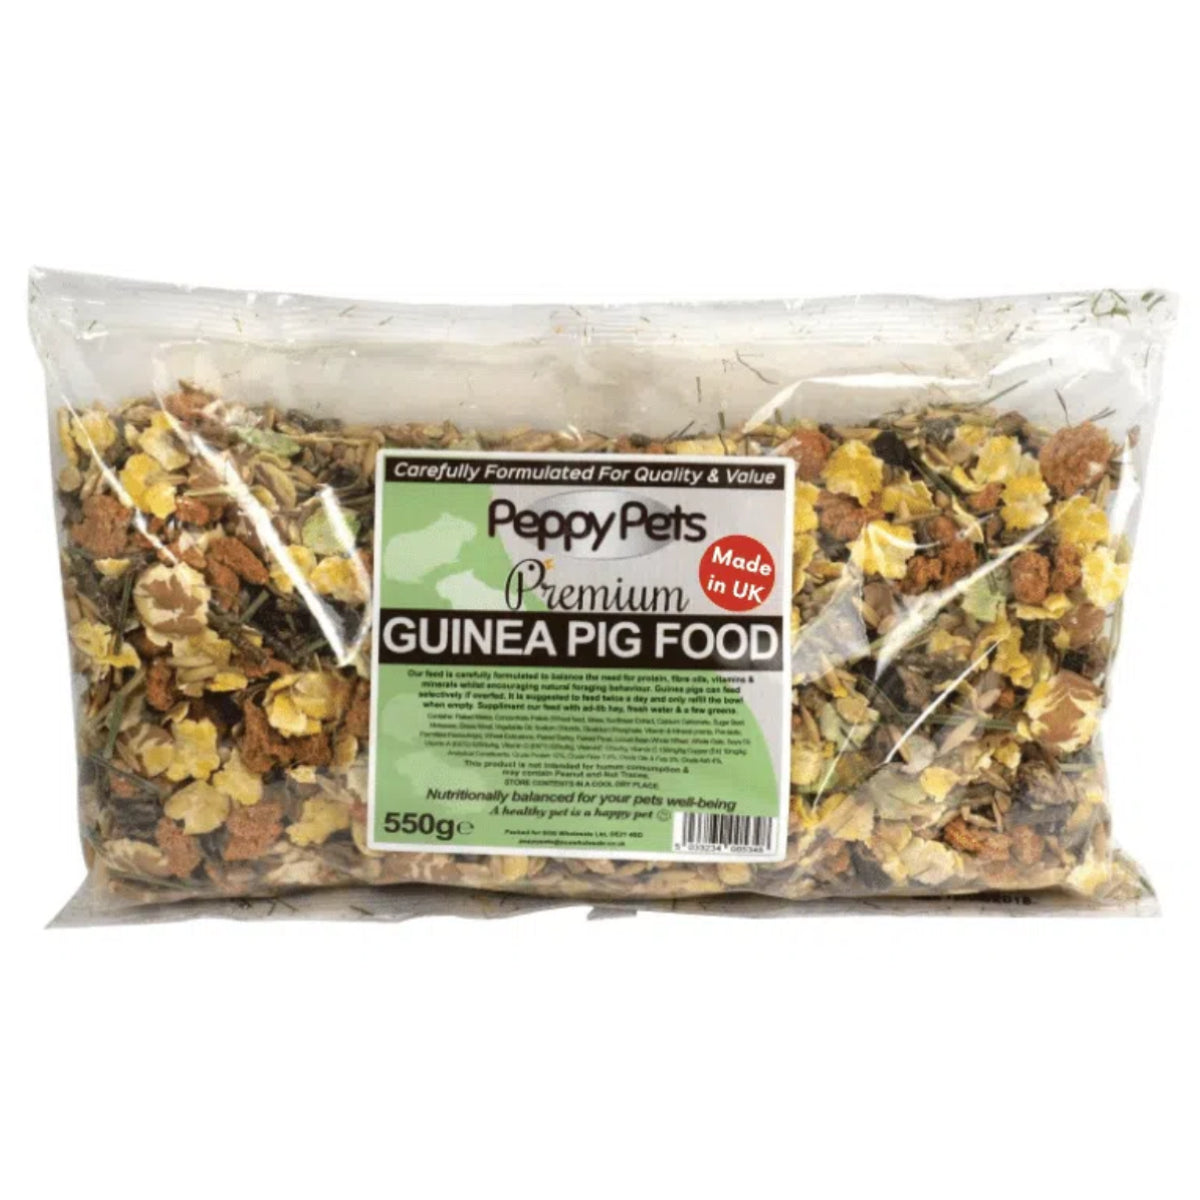 Peppy Pets - Guinea Pig Food - 550g - Continental Food Store